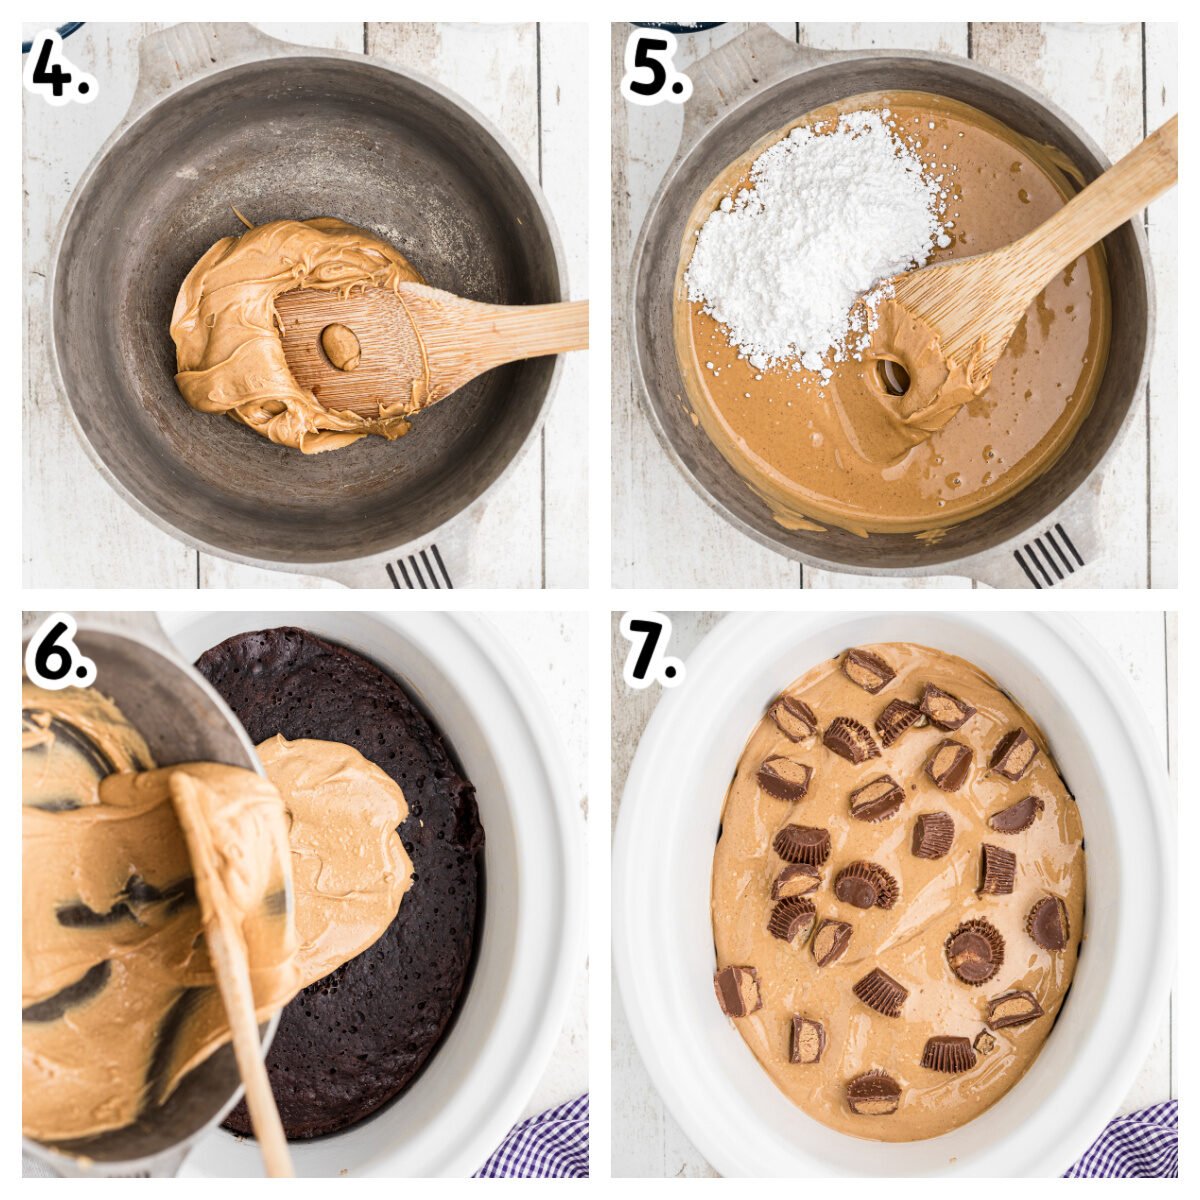 oven images about how to make and add peanut butter frosting to cake.